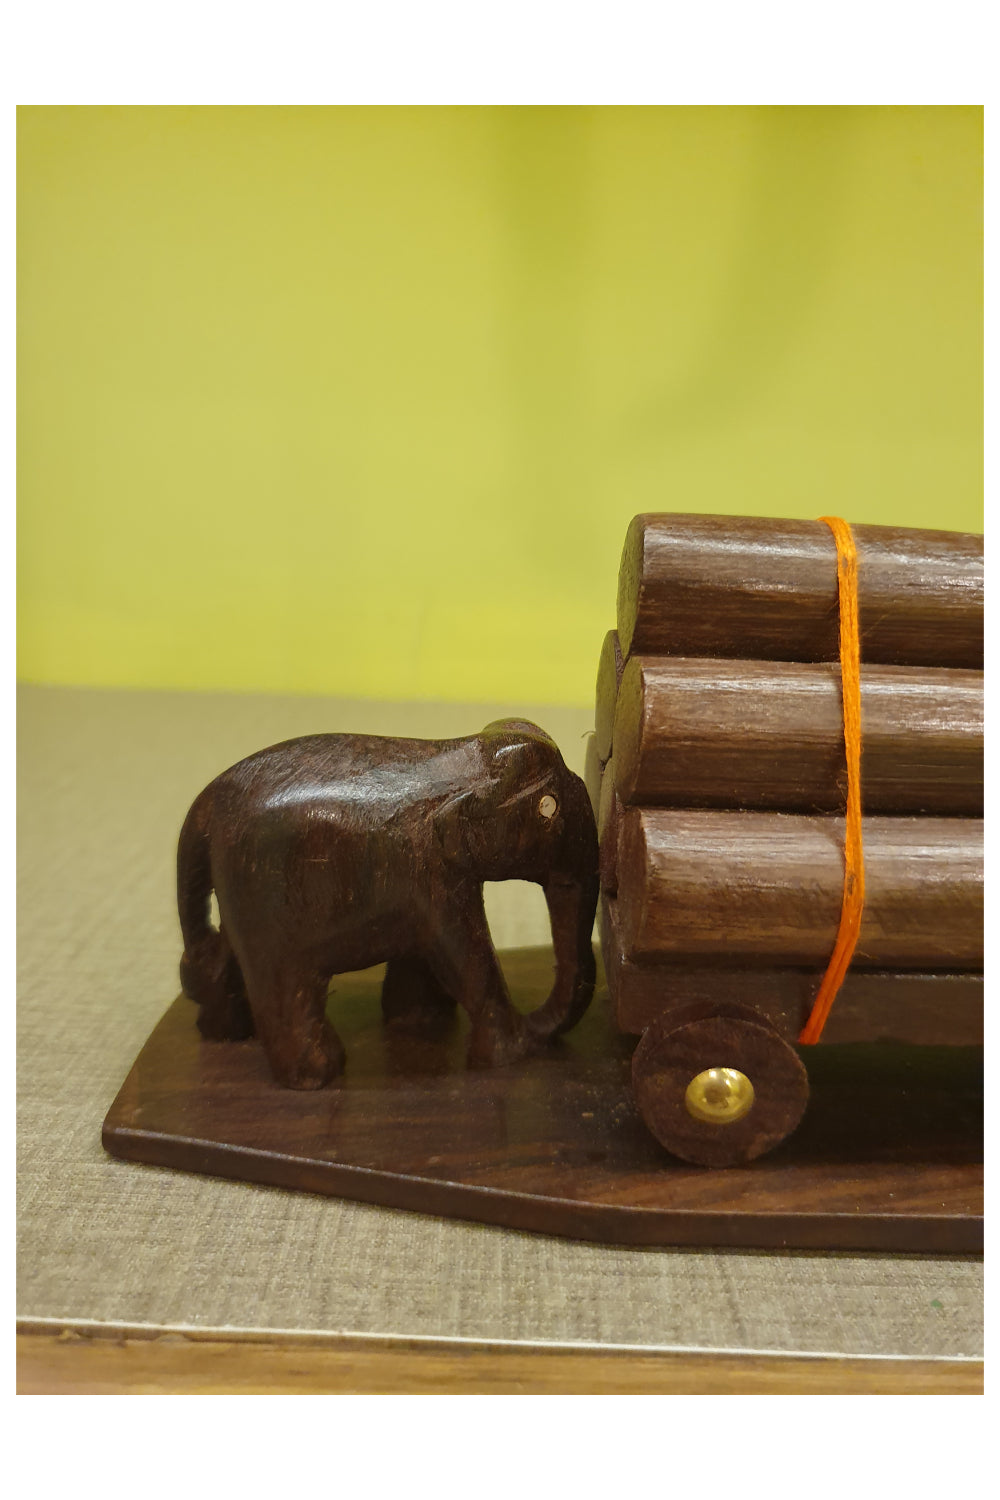 Southloom Handmade Elephant Handicraft (Carved from Rose Wood) 6 Inches